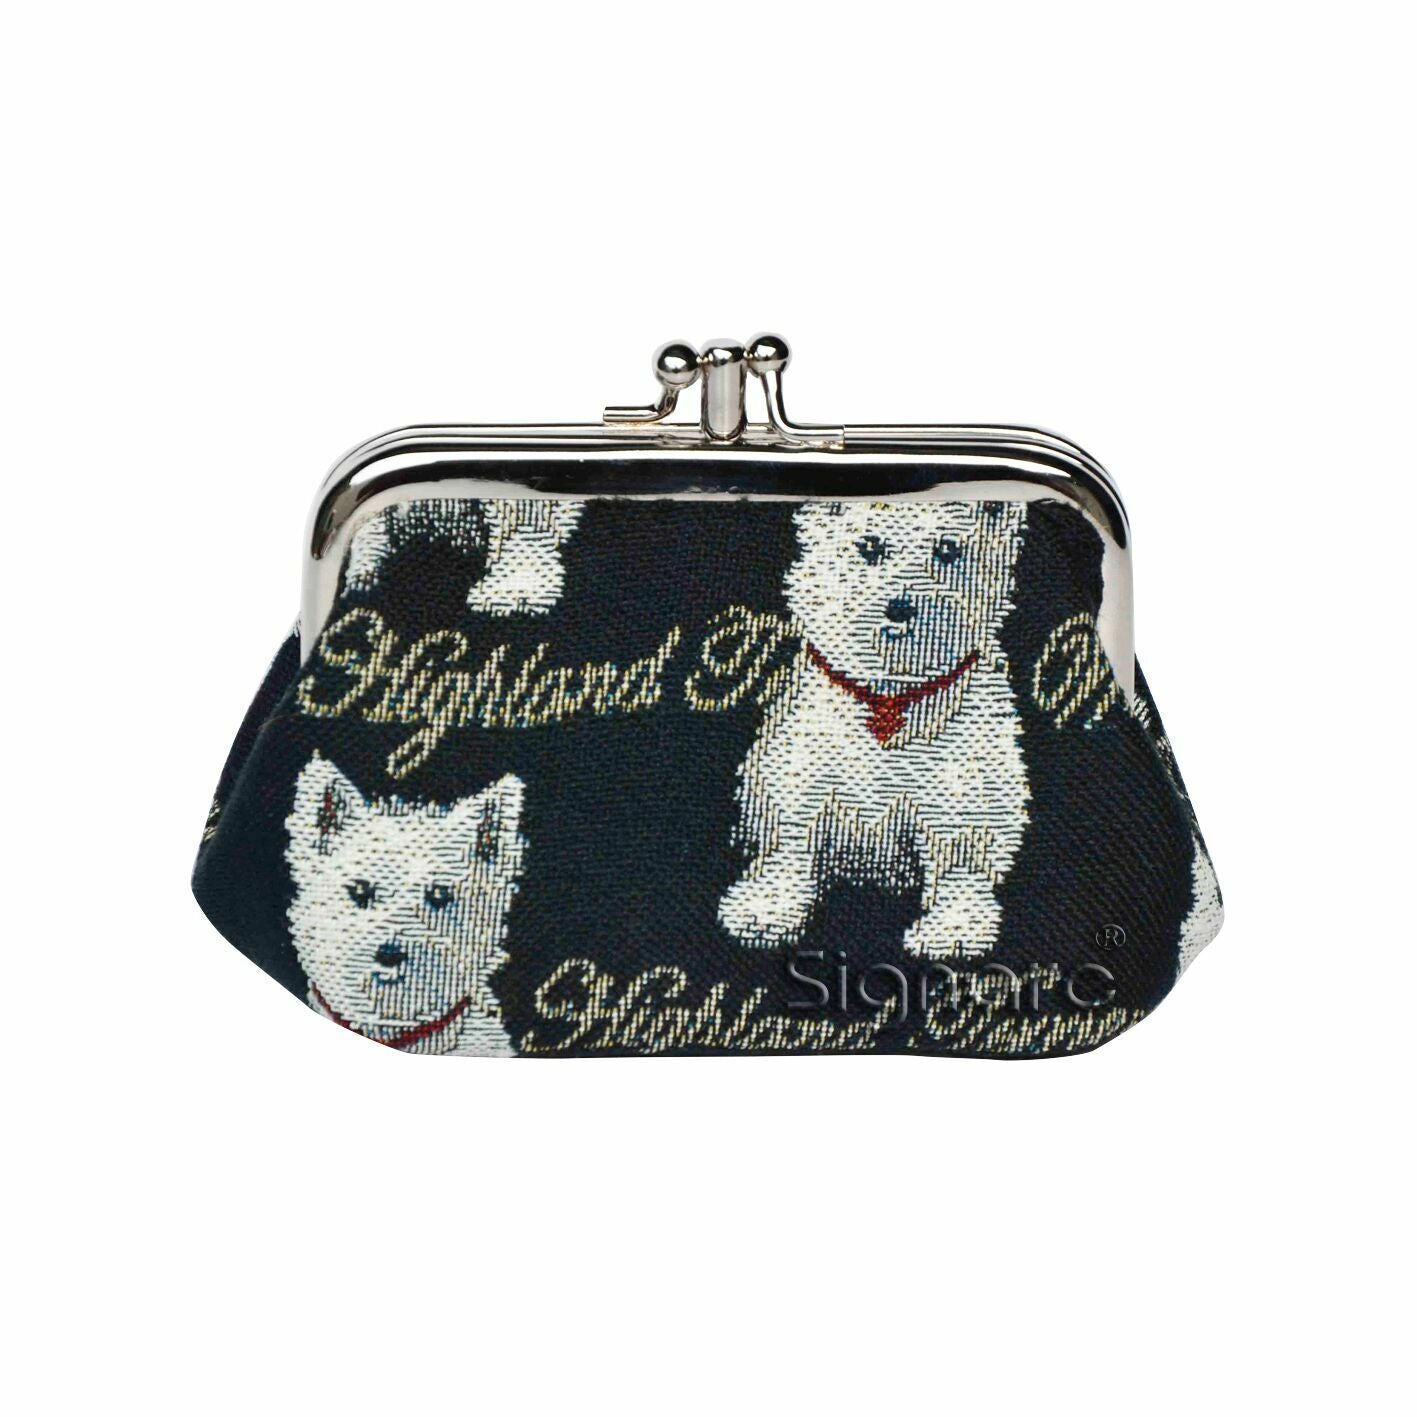 Signare Westie Dog  Double Section Coin Frame Purse Tapestry NWT